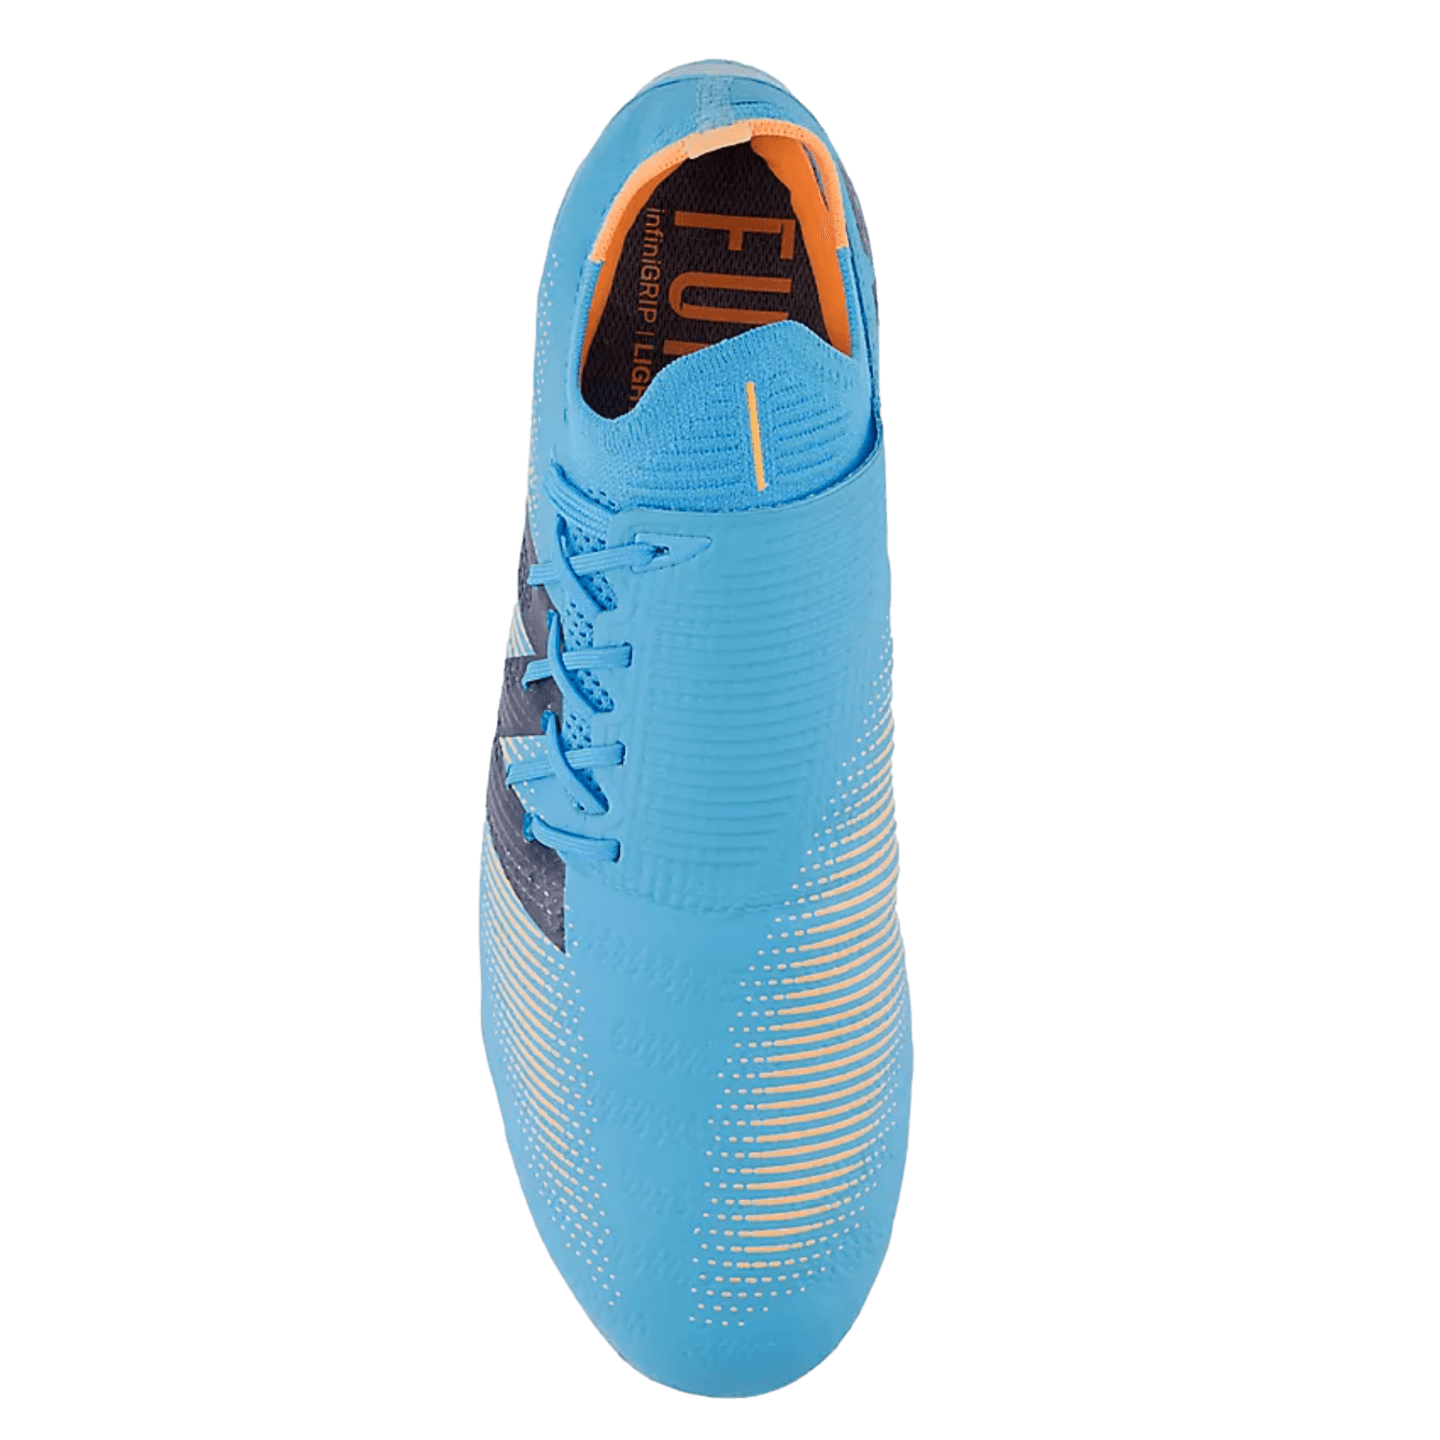 New Balance Furon Pro V7+ Firm Ground Cleats